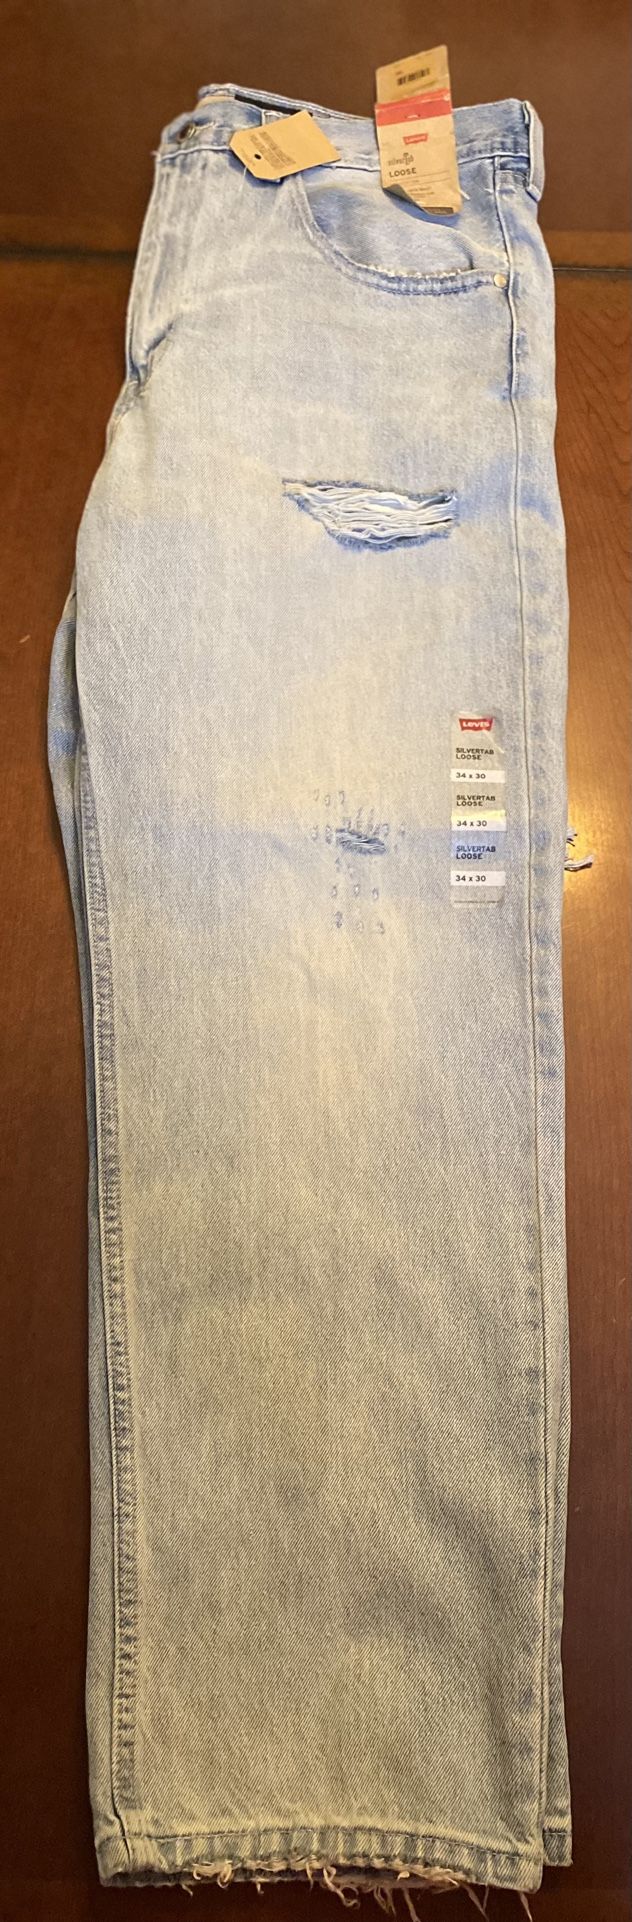 Brand New Levi’s Silver Tab Loose Fit Jeans Mens Size 34x30